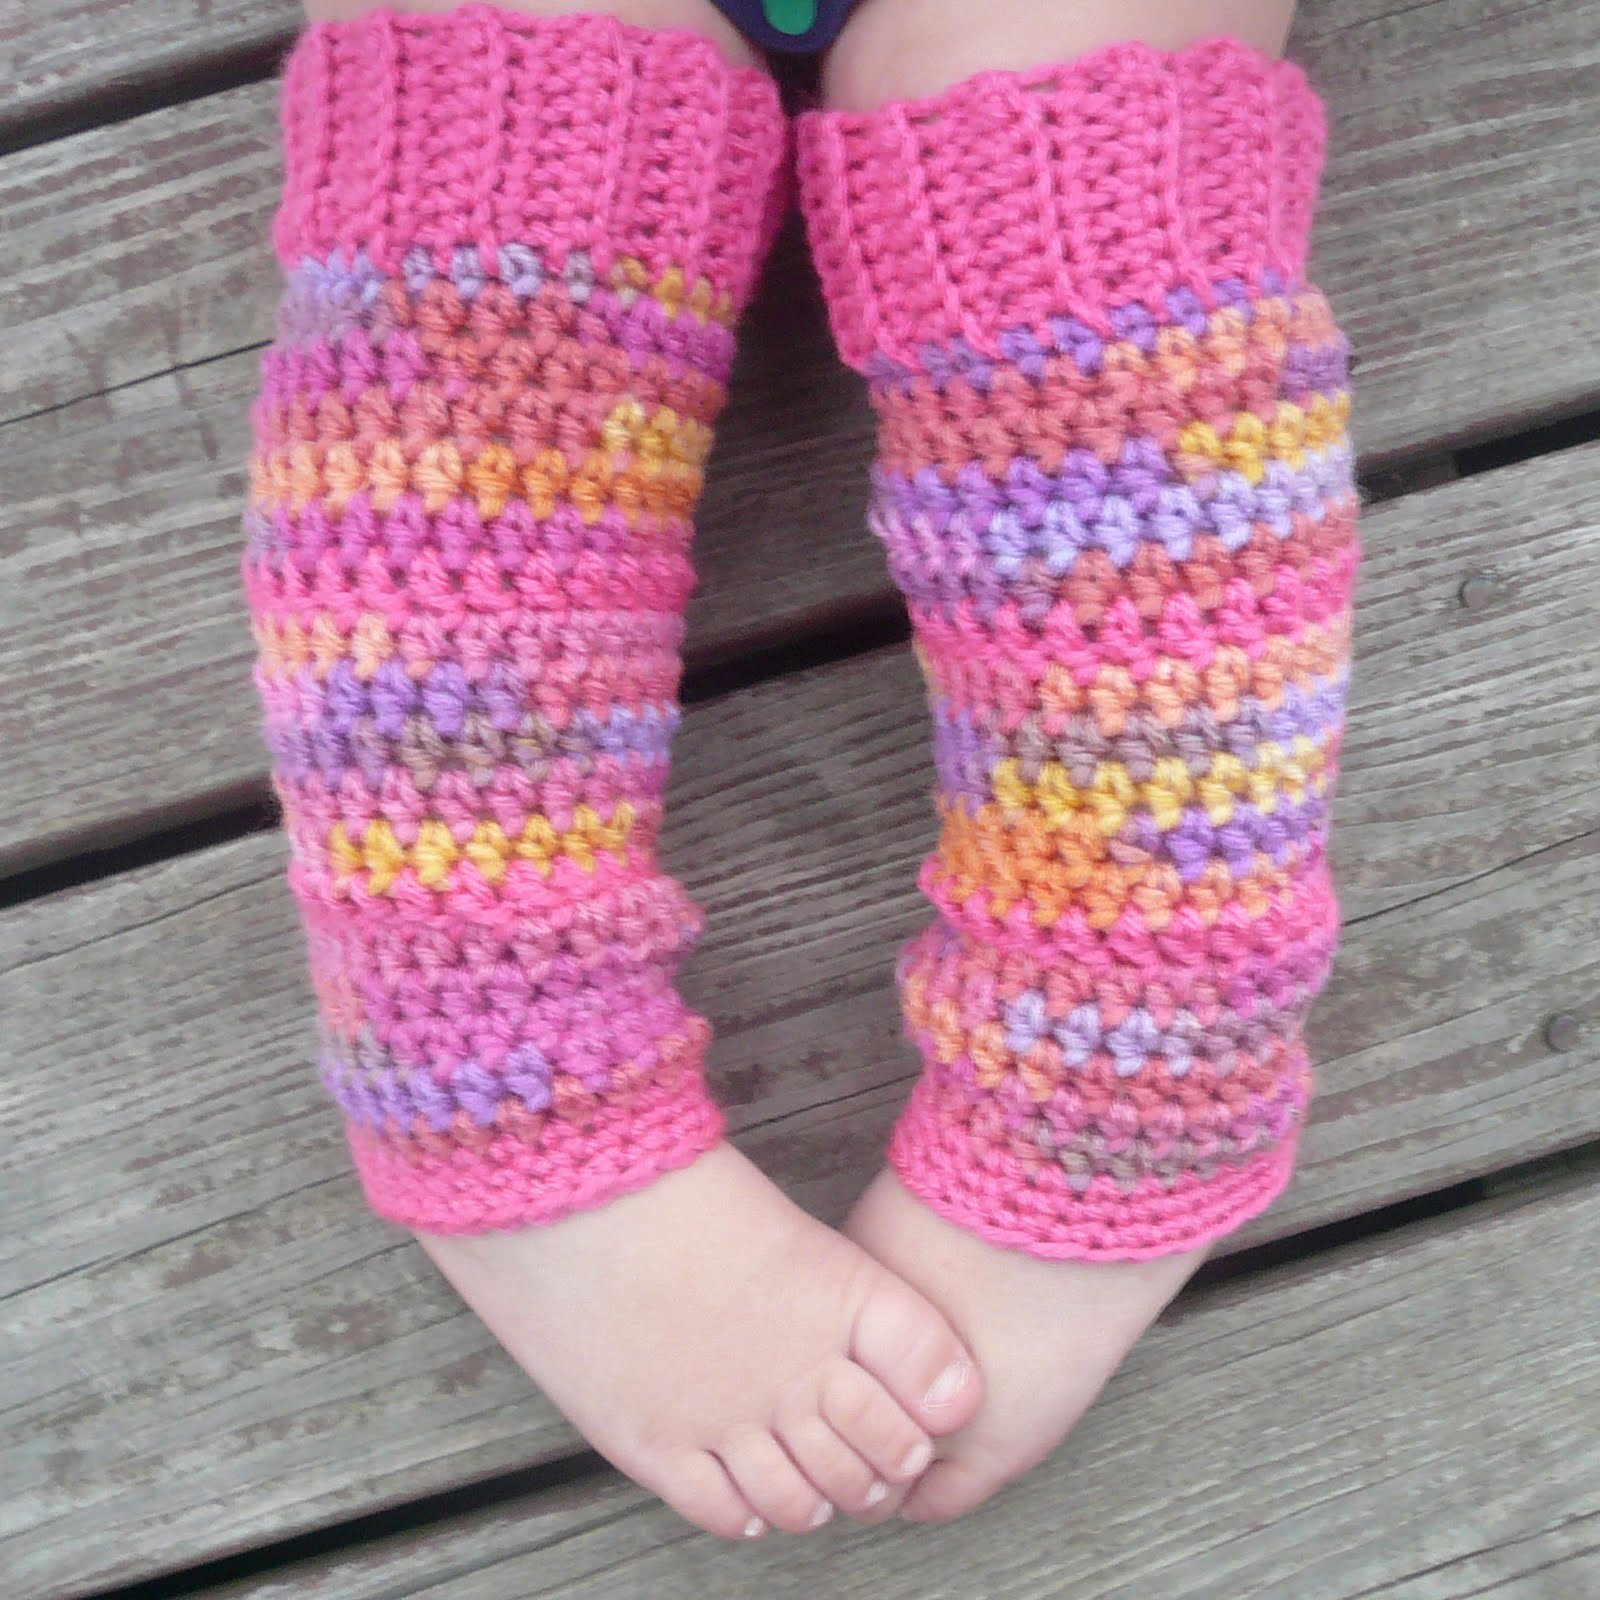 FREE CROCHET PATTERNS FOR WRIST AND LEG WARMERS Crochet and Knitting